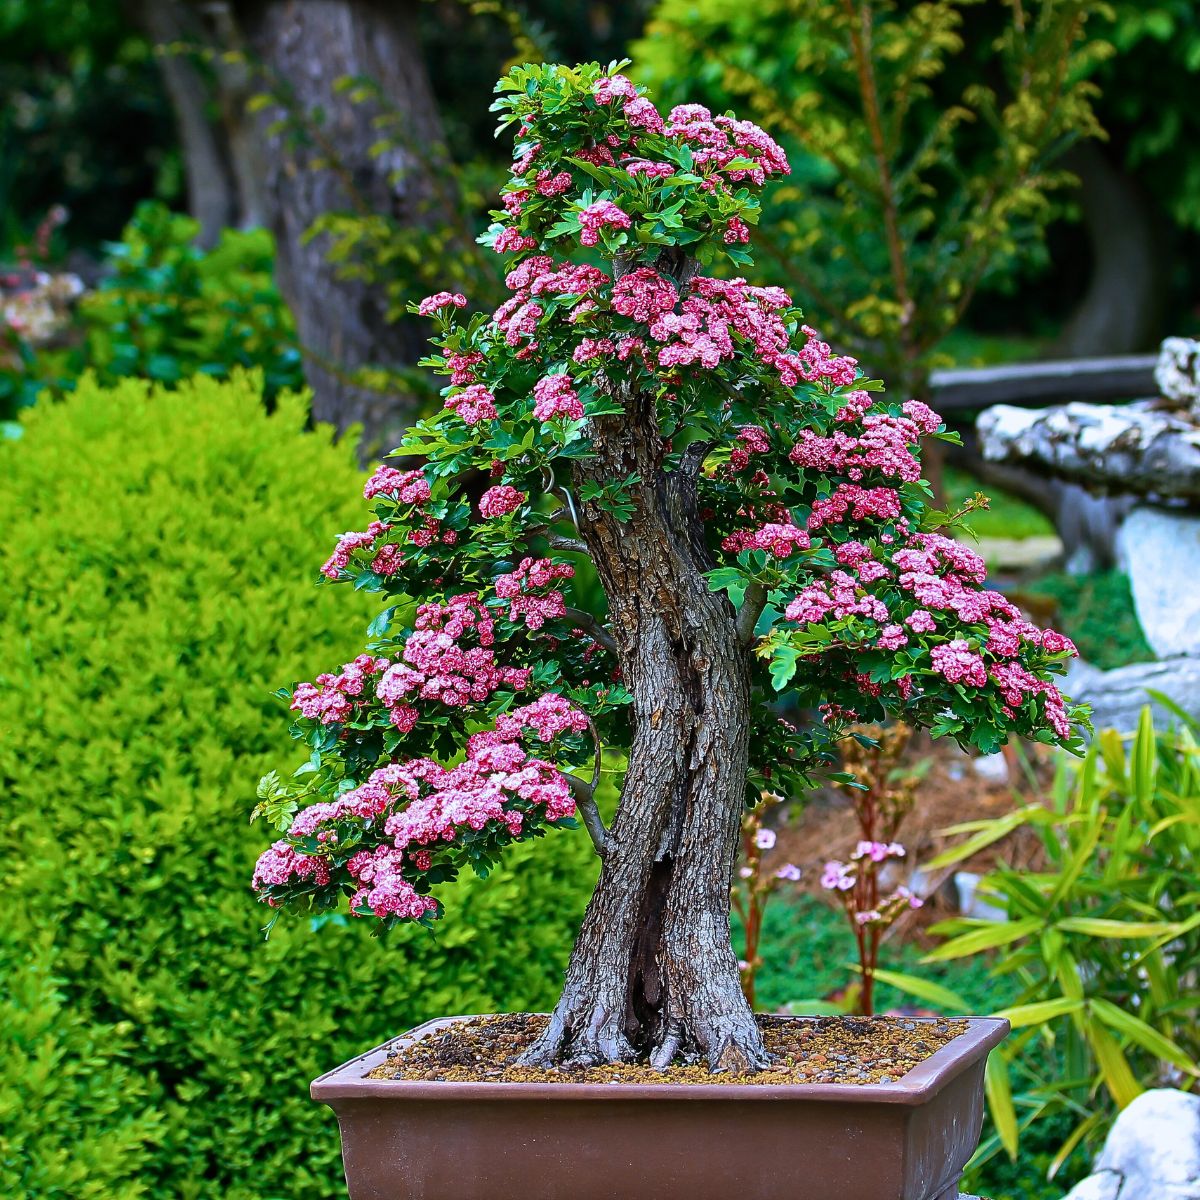 Enhance and Brighten Your Areas with These Seven Miniature Bonsai Trees